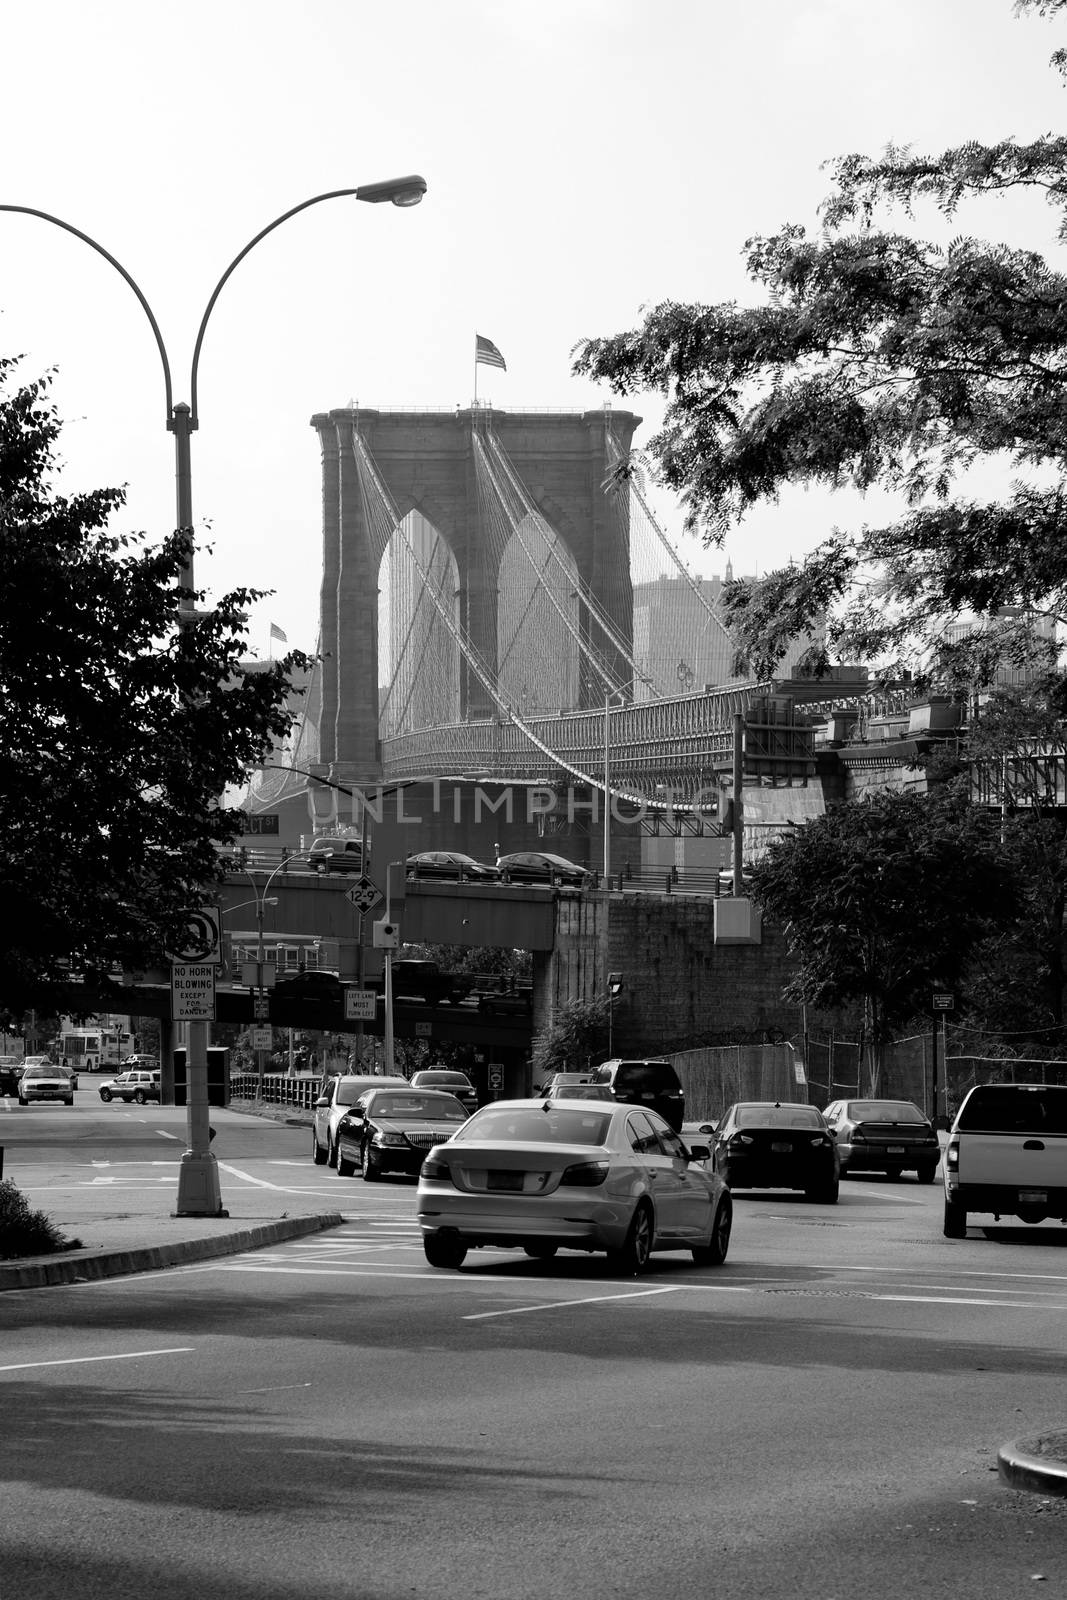 Brooklyn Bridge as seen from a rare street view in New York City.